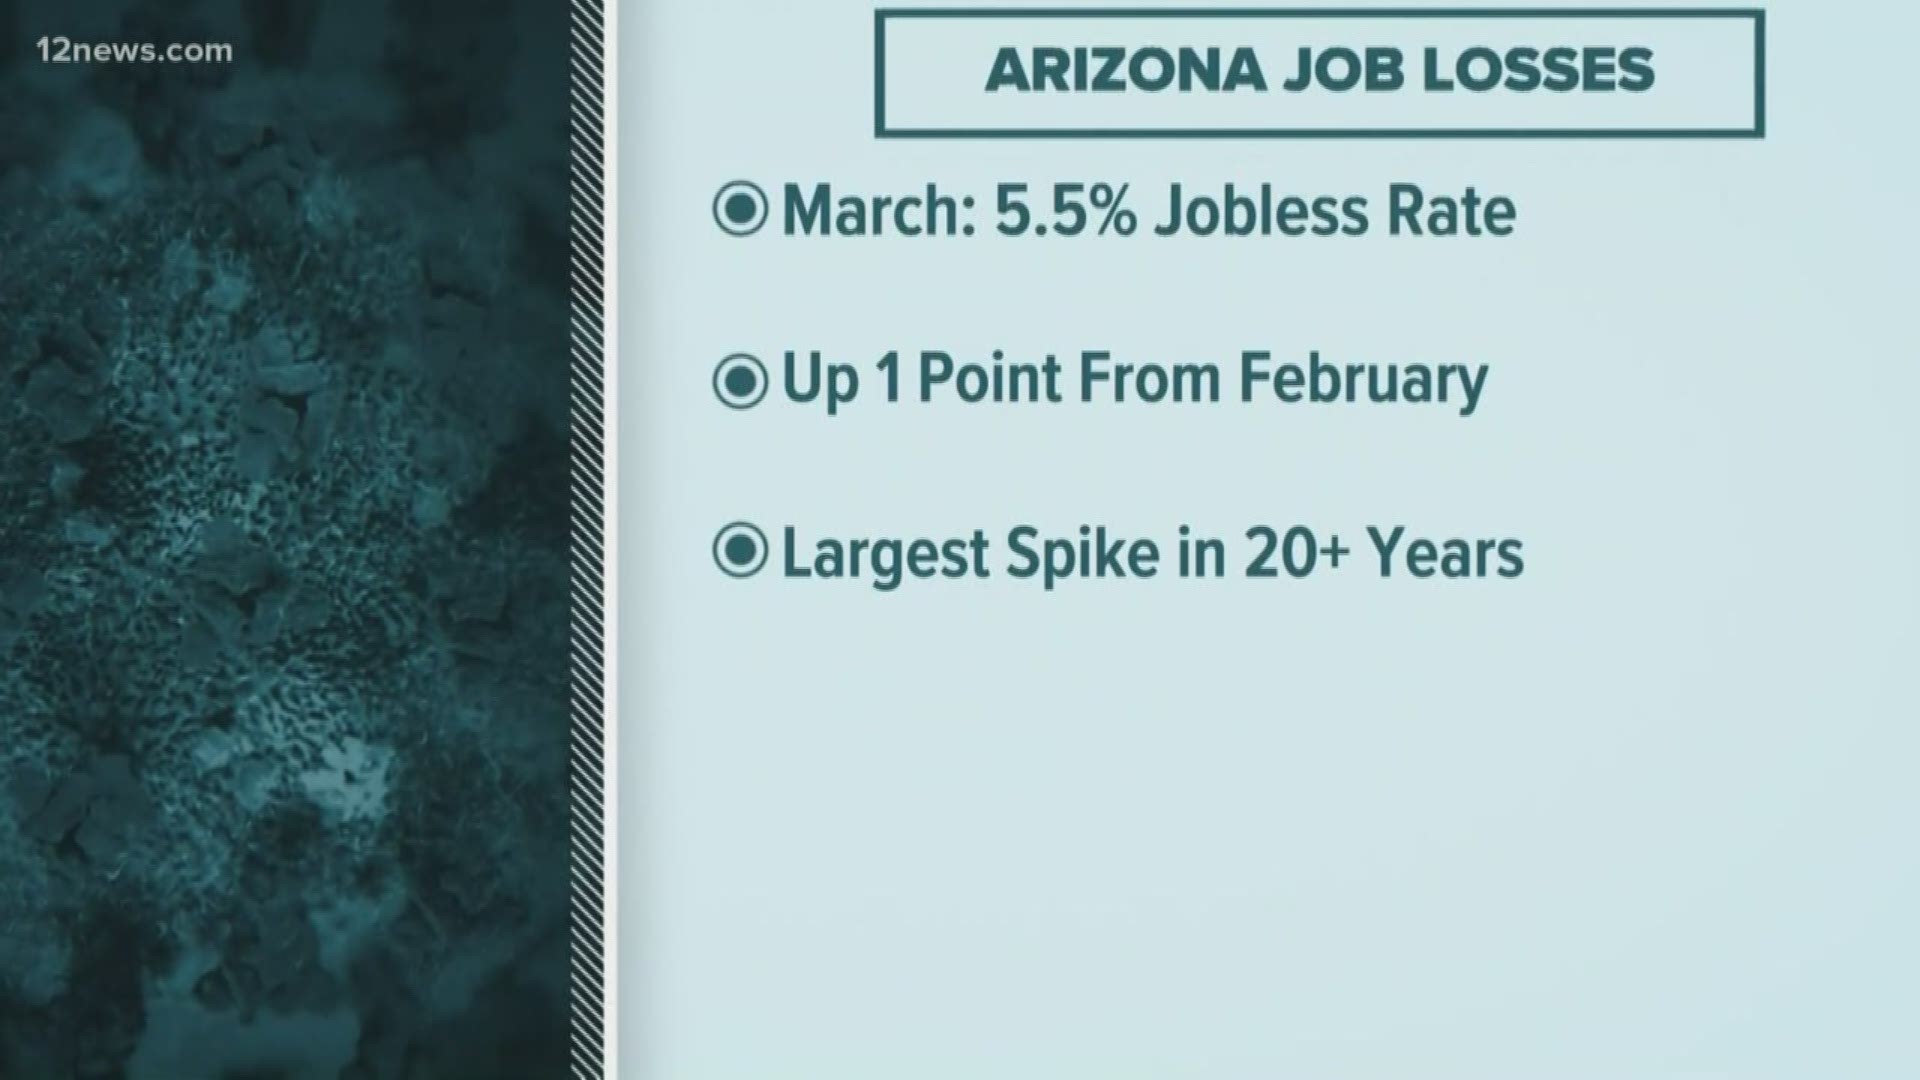 The unemployment report released Thursday shows unemployment jumped up to 5.5% in Arizona. The report might not be entirely accurate though.